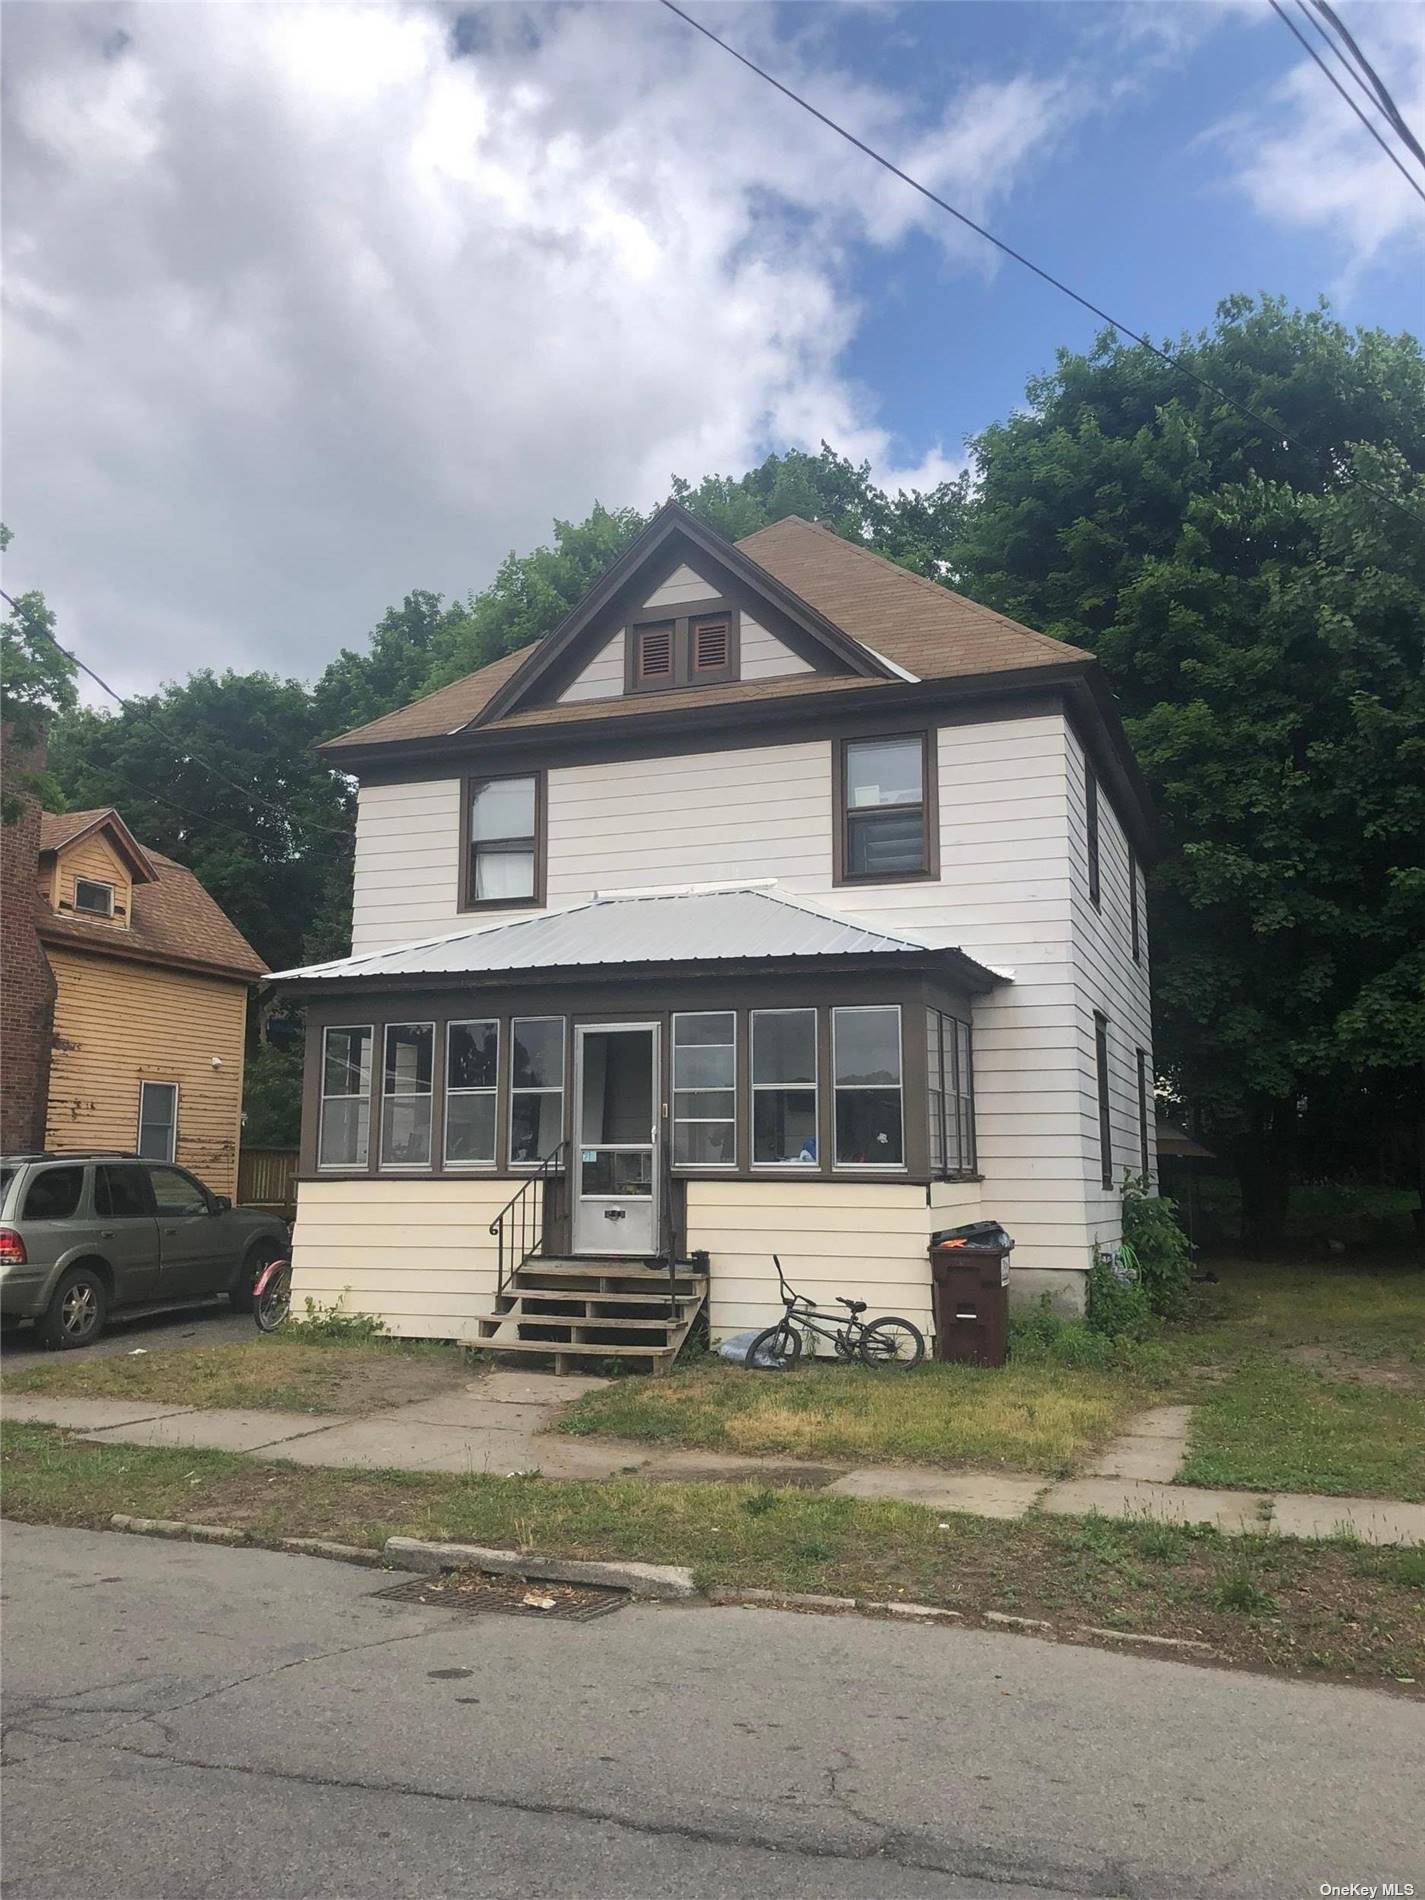 Discover a cozy 4 bedroom, 1 bathroom home tucked in the heart of Gloversville, mere steps away from McNab Elementary School.